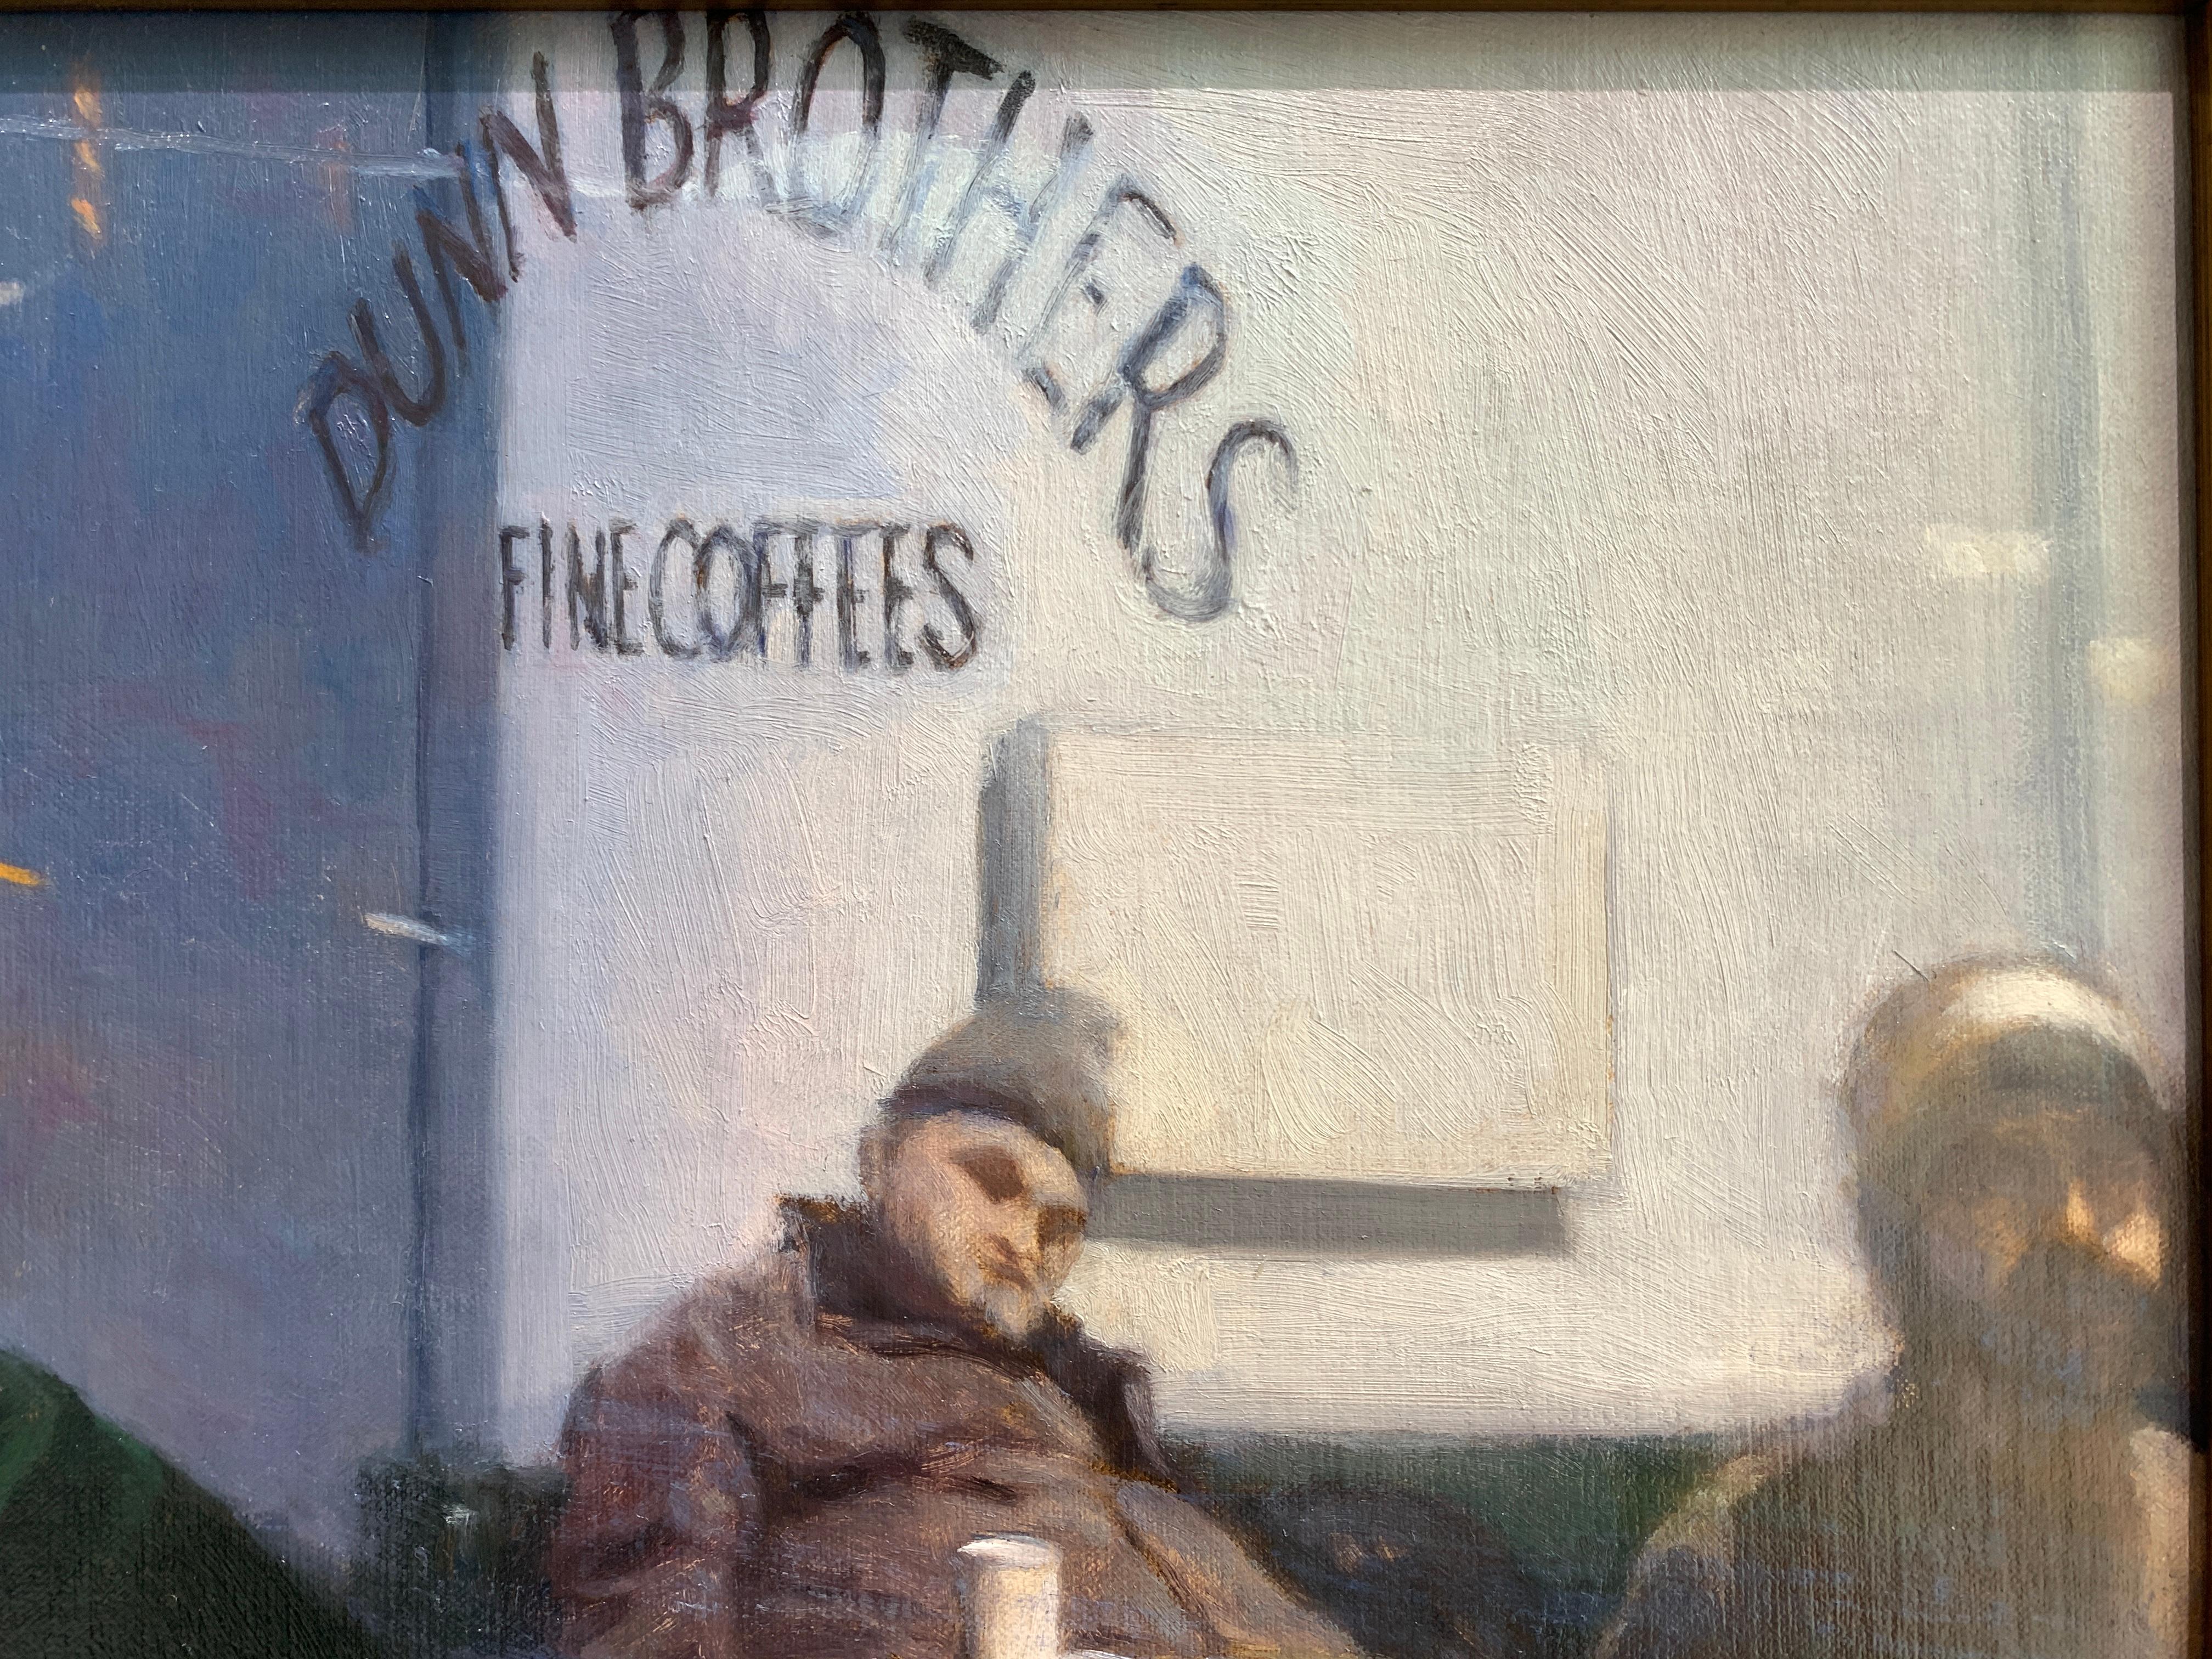 An oil painting featuring 3 figures, at Dunn Brothers Coffee Shop, in St. Paul, Minnesota. Two men sit at their own tables, on the other side of the glass of the storefront window; sitting pensively, wearing knit winter hats. The center figure leans